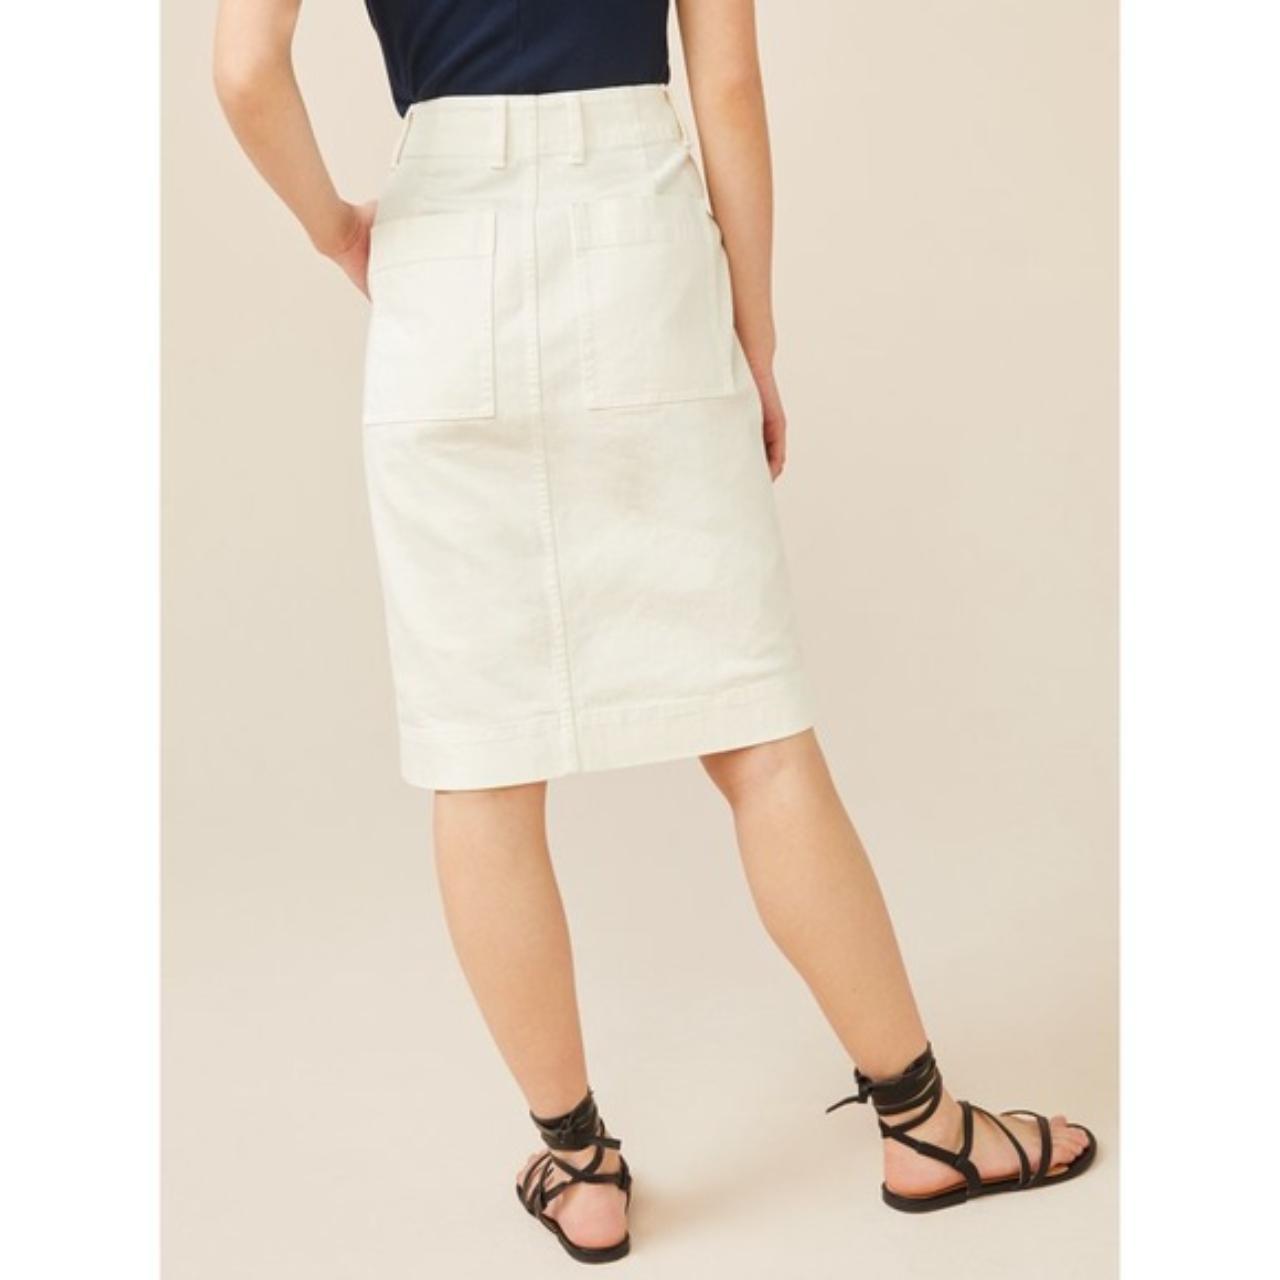 Free Assembly Women's White and Cream Skirt (2)